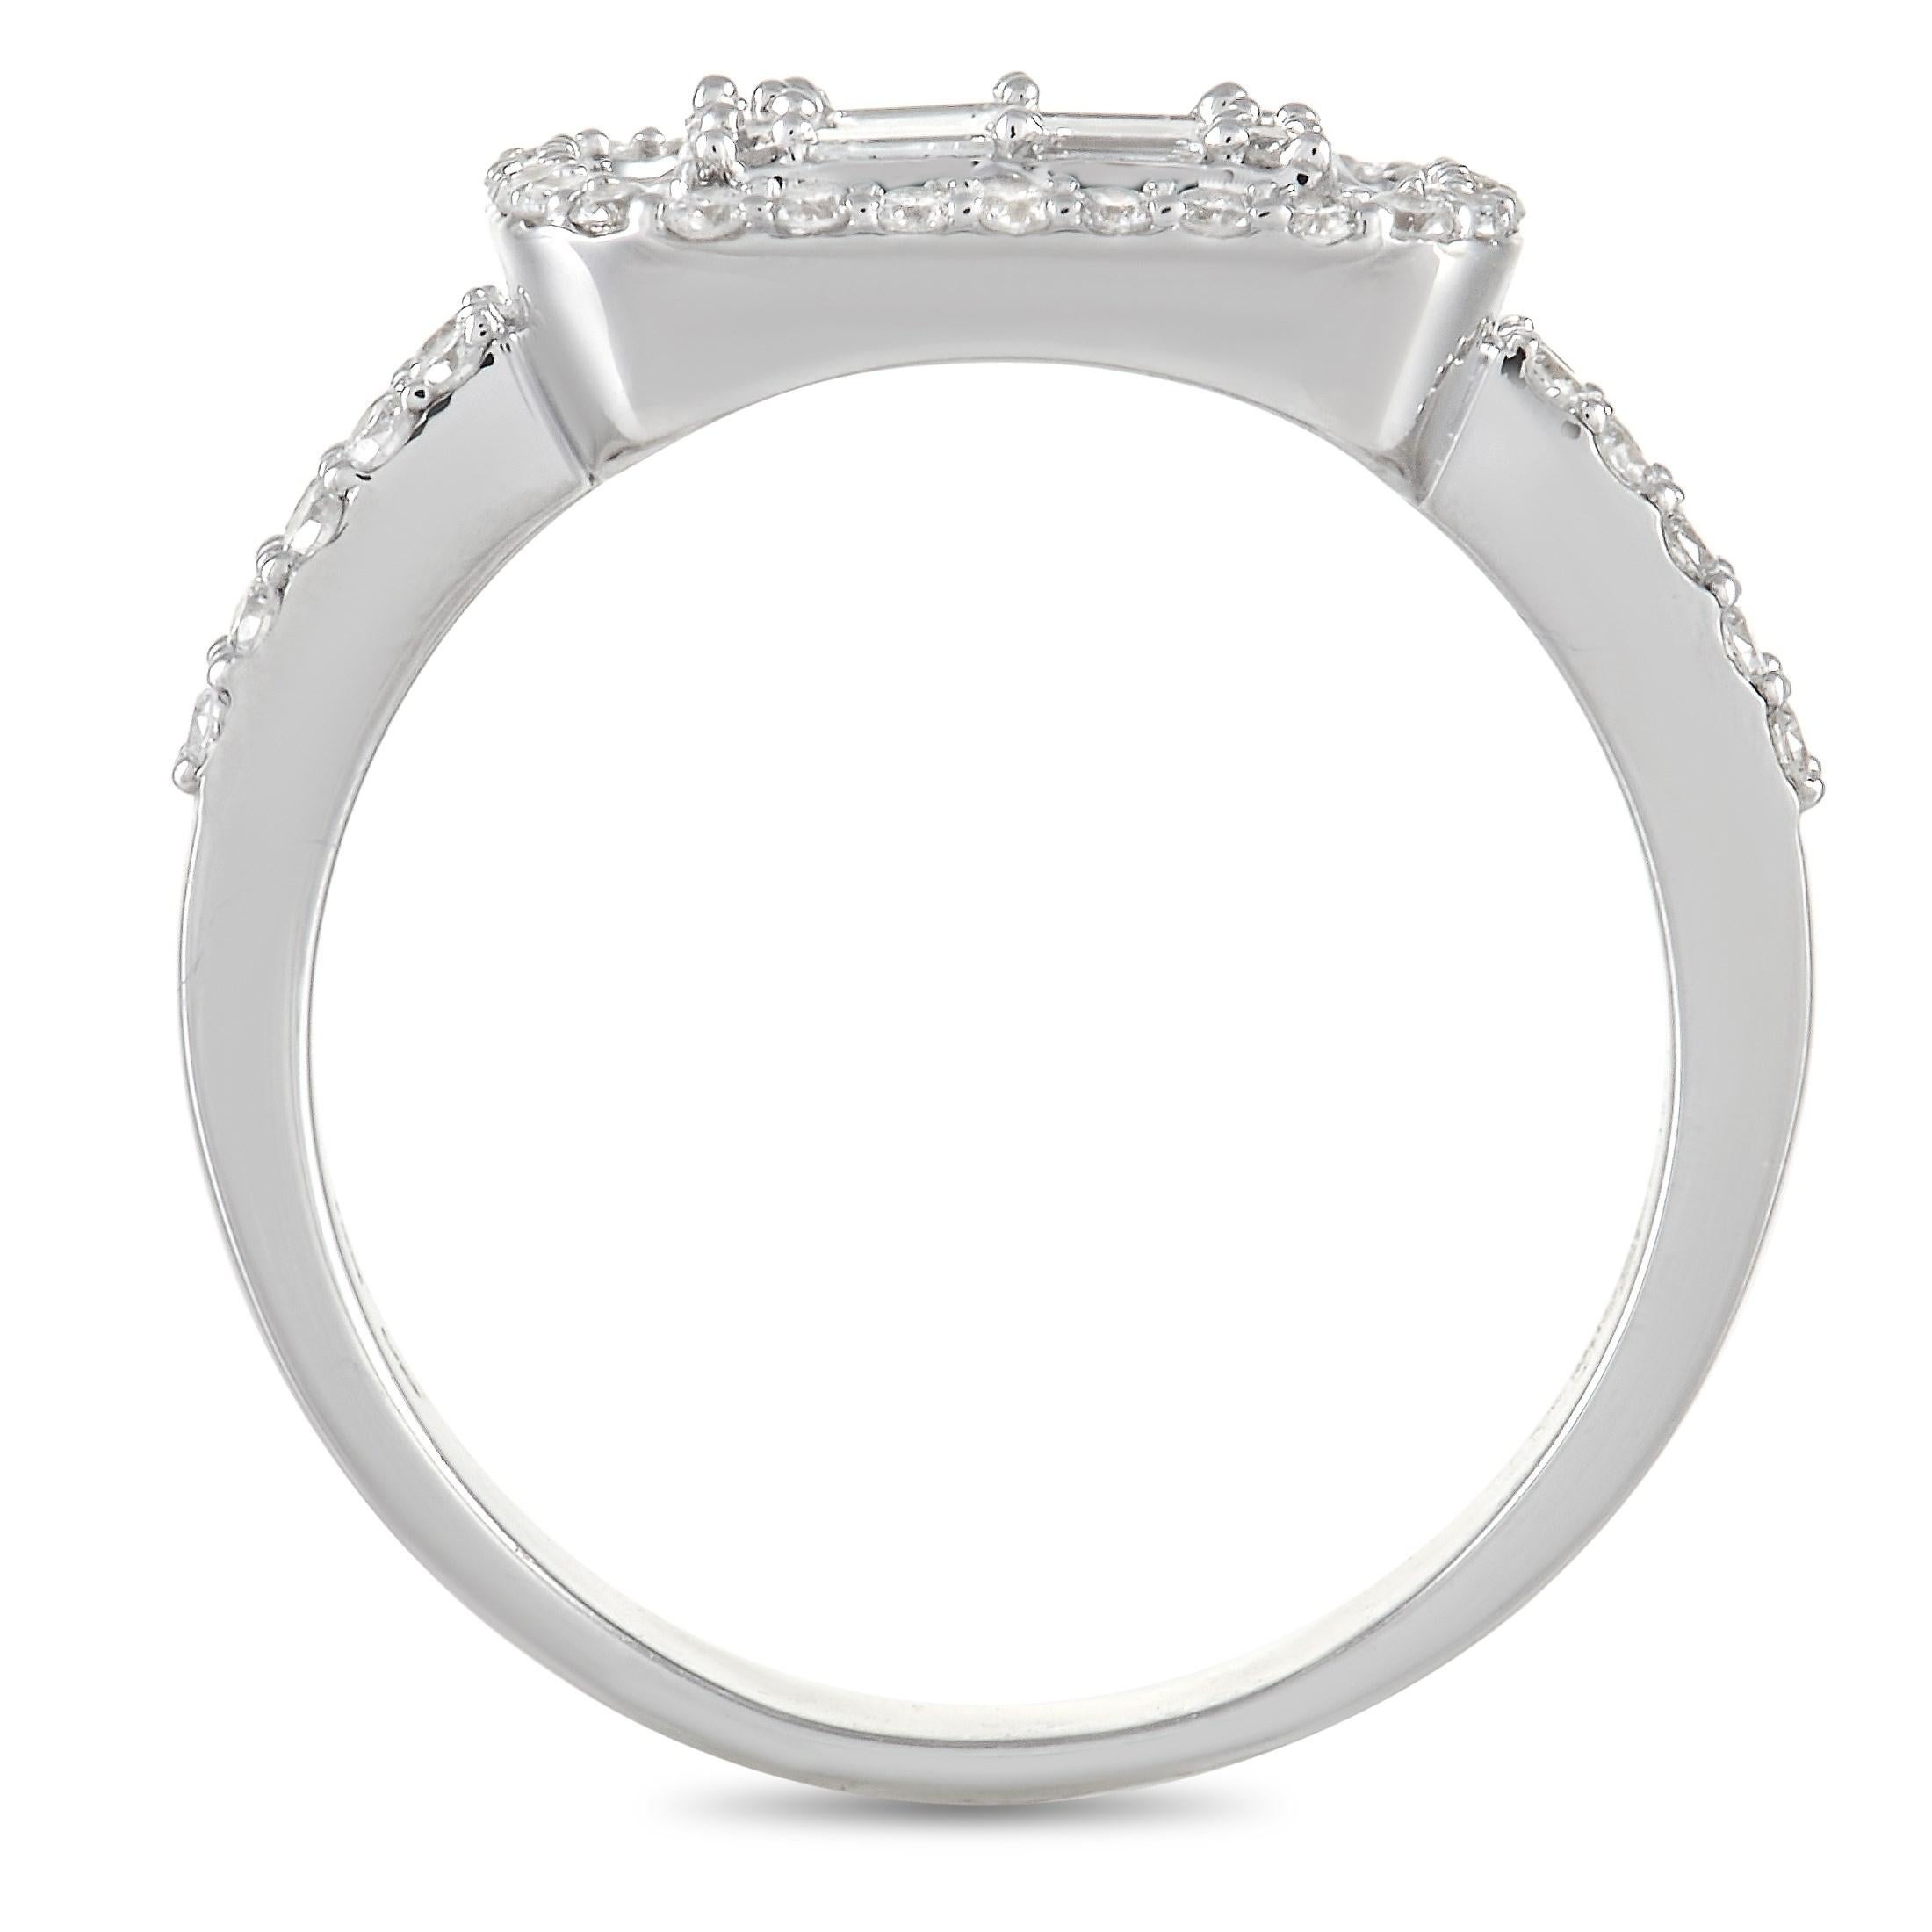 This gorgeous LB Exclusive 14K White Gold 1.37 ct Diamond Ring is sure to stun. The ring is made with 14K white gold and set with 12 princess cut diamonds arranged in three by four square over the face of the ring. The center stones are accented by